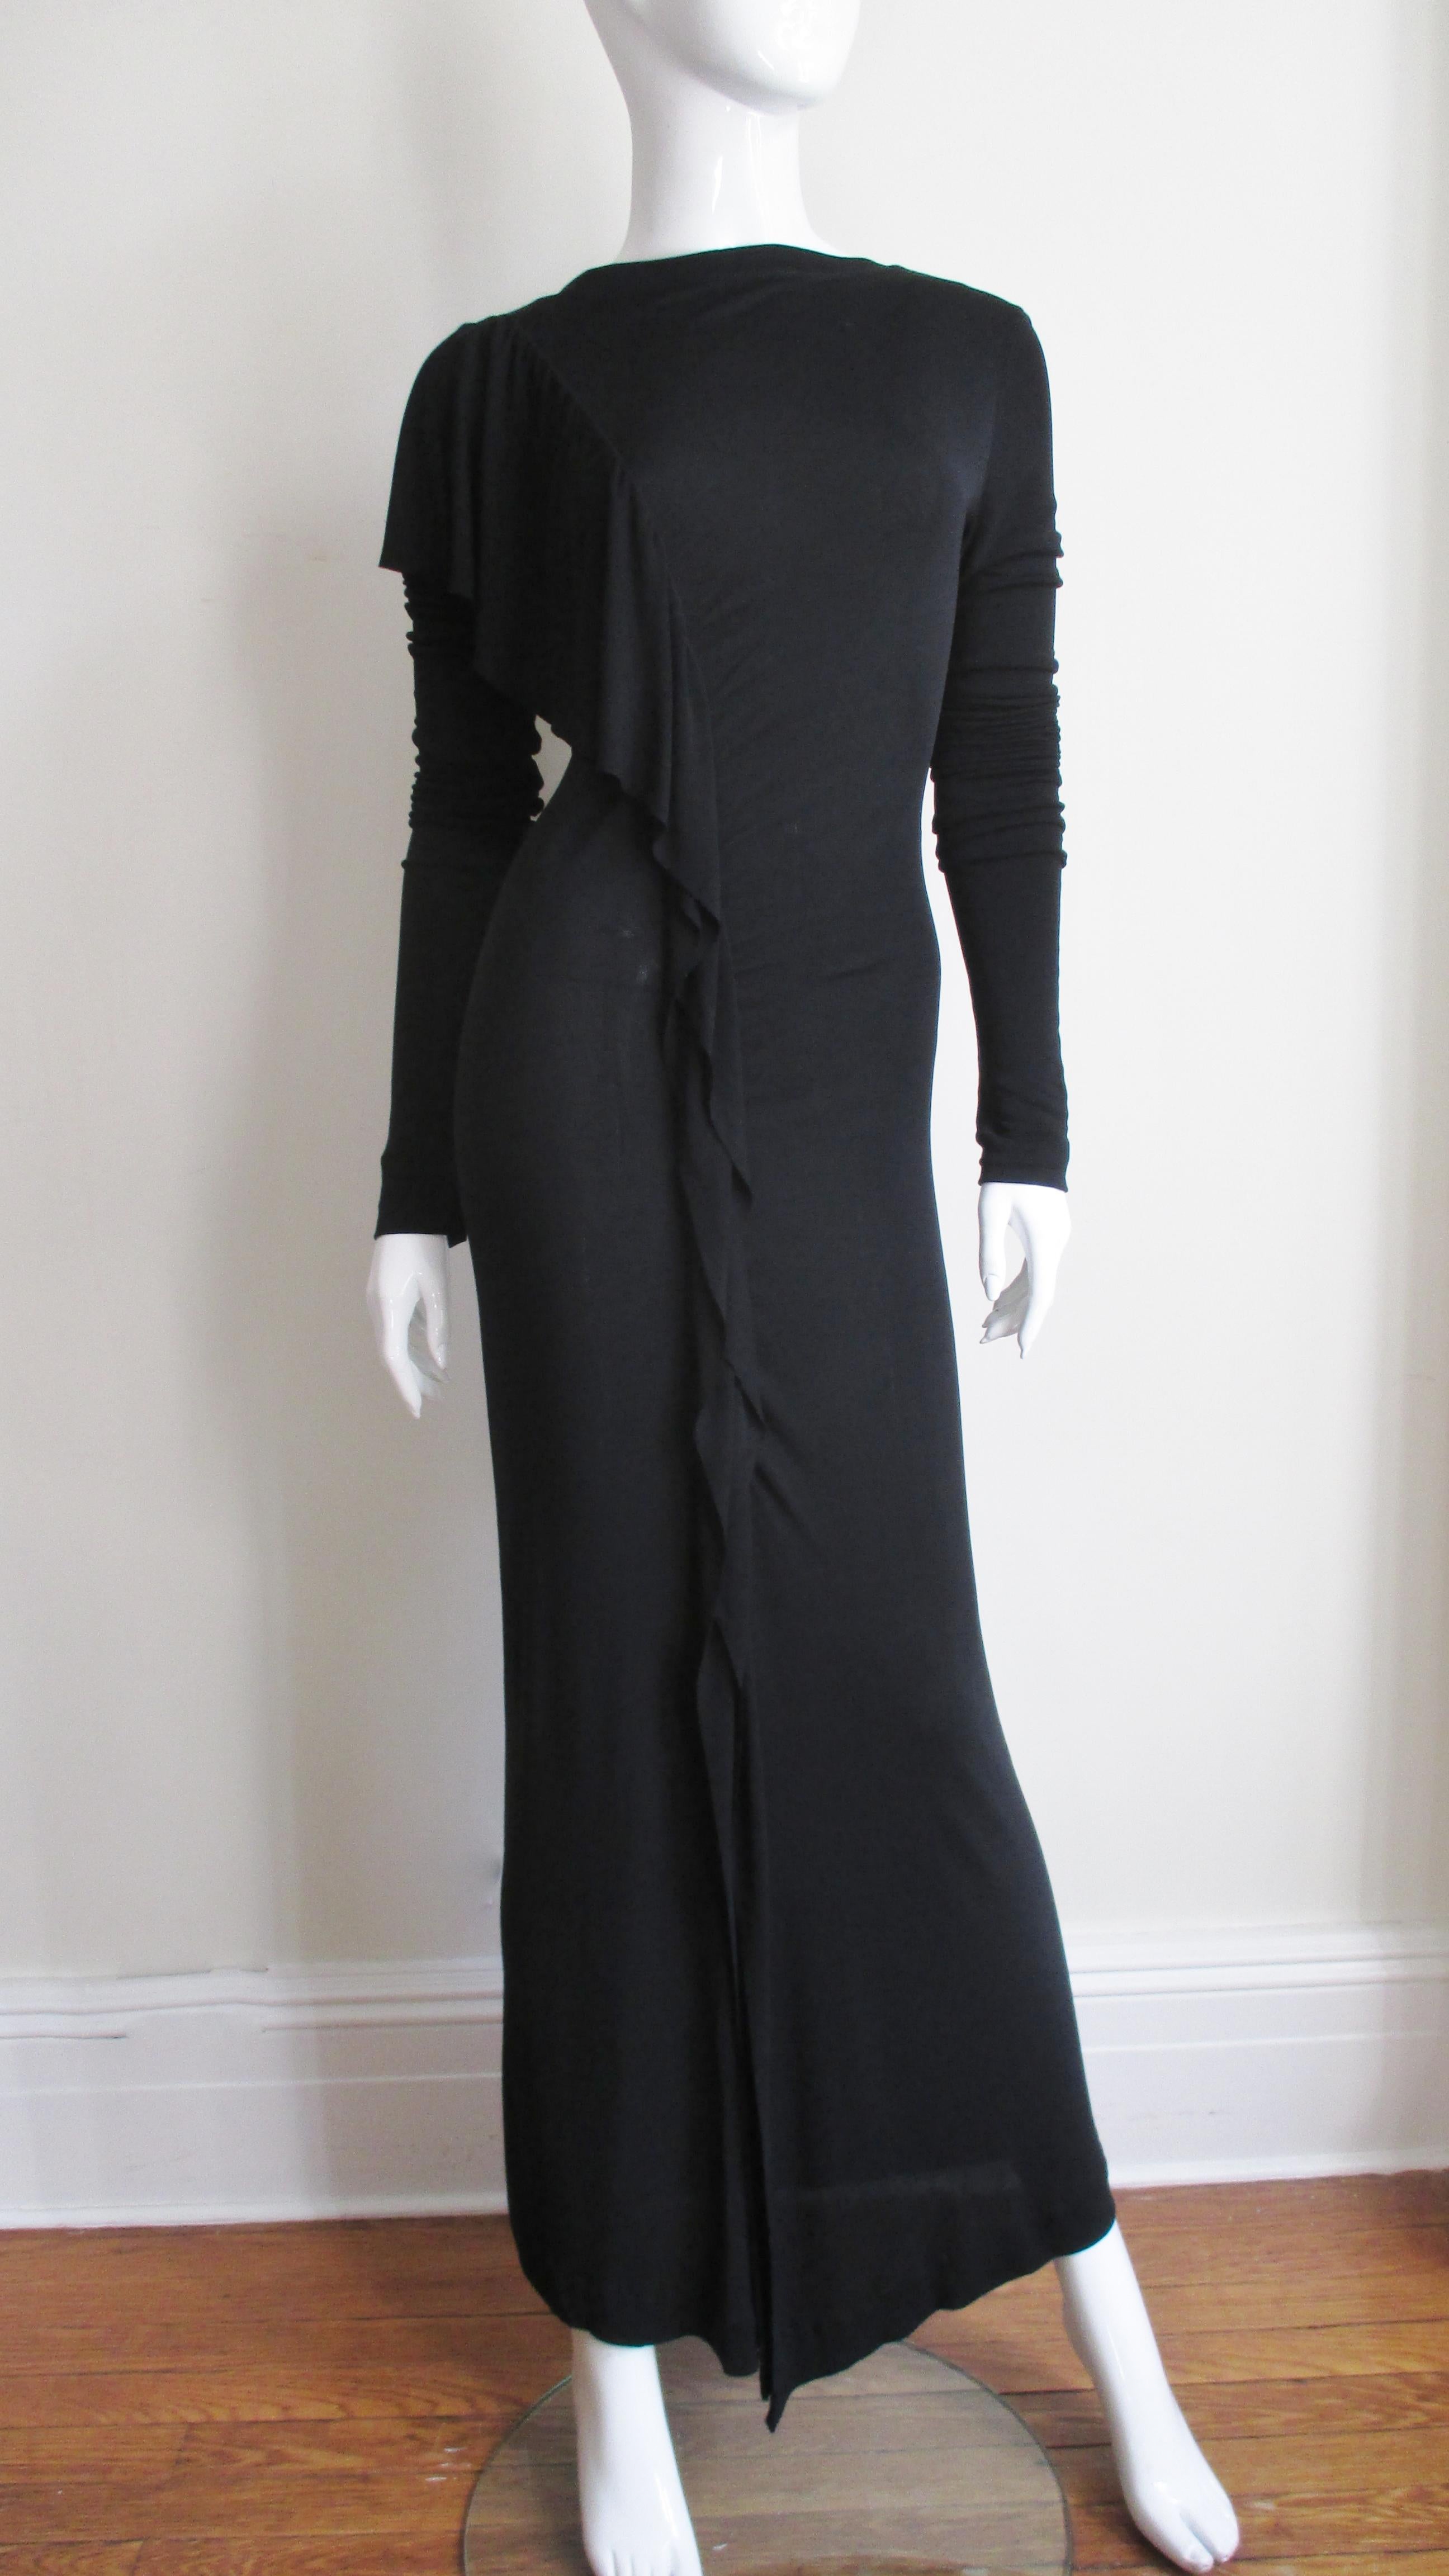 A super black silk jersey dress from Jean Paul Gaultier.  It has a bateau neckline and fitted with a gradated ruffle starting at the front of one shoulder straight down the front to an opening above the knee.  The sleeves are extra long meant for